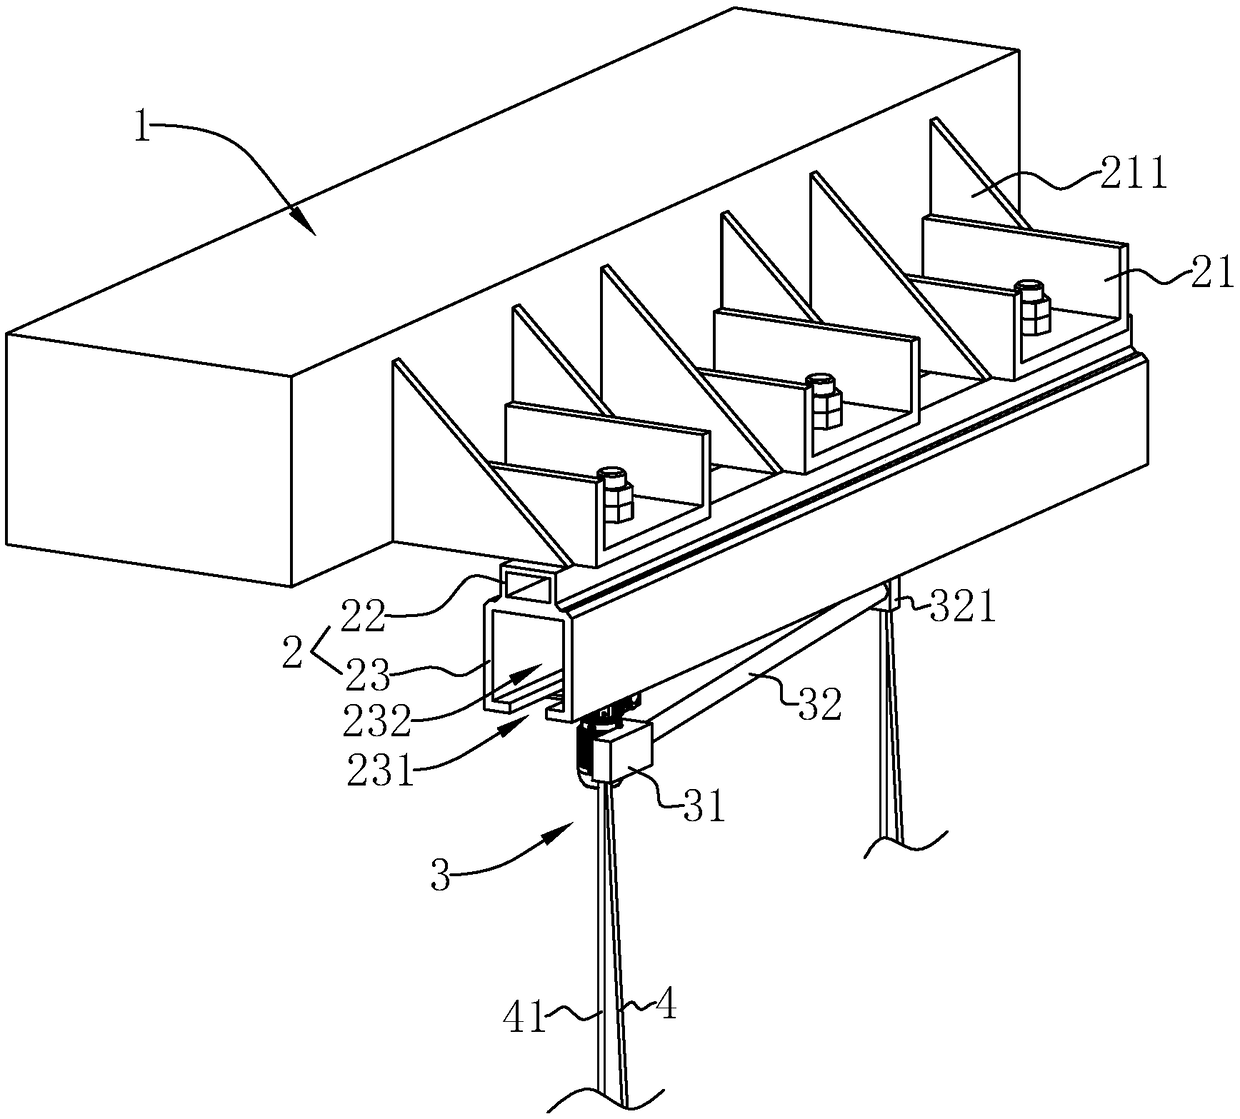 Rail-mounted working platform for building high-altitude suspension construction and capable of horizontally and vertically walking